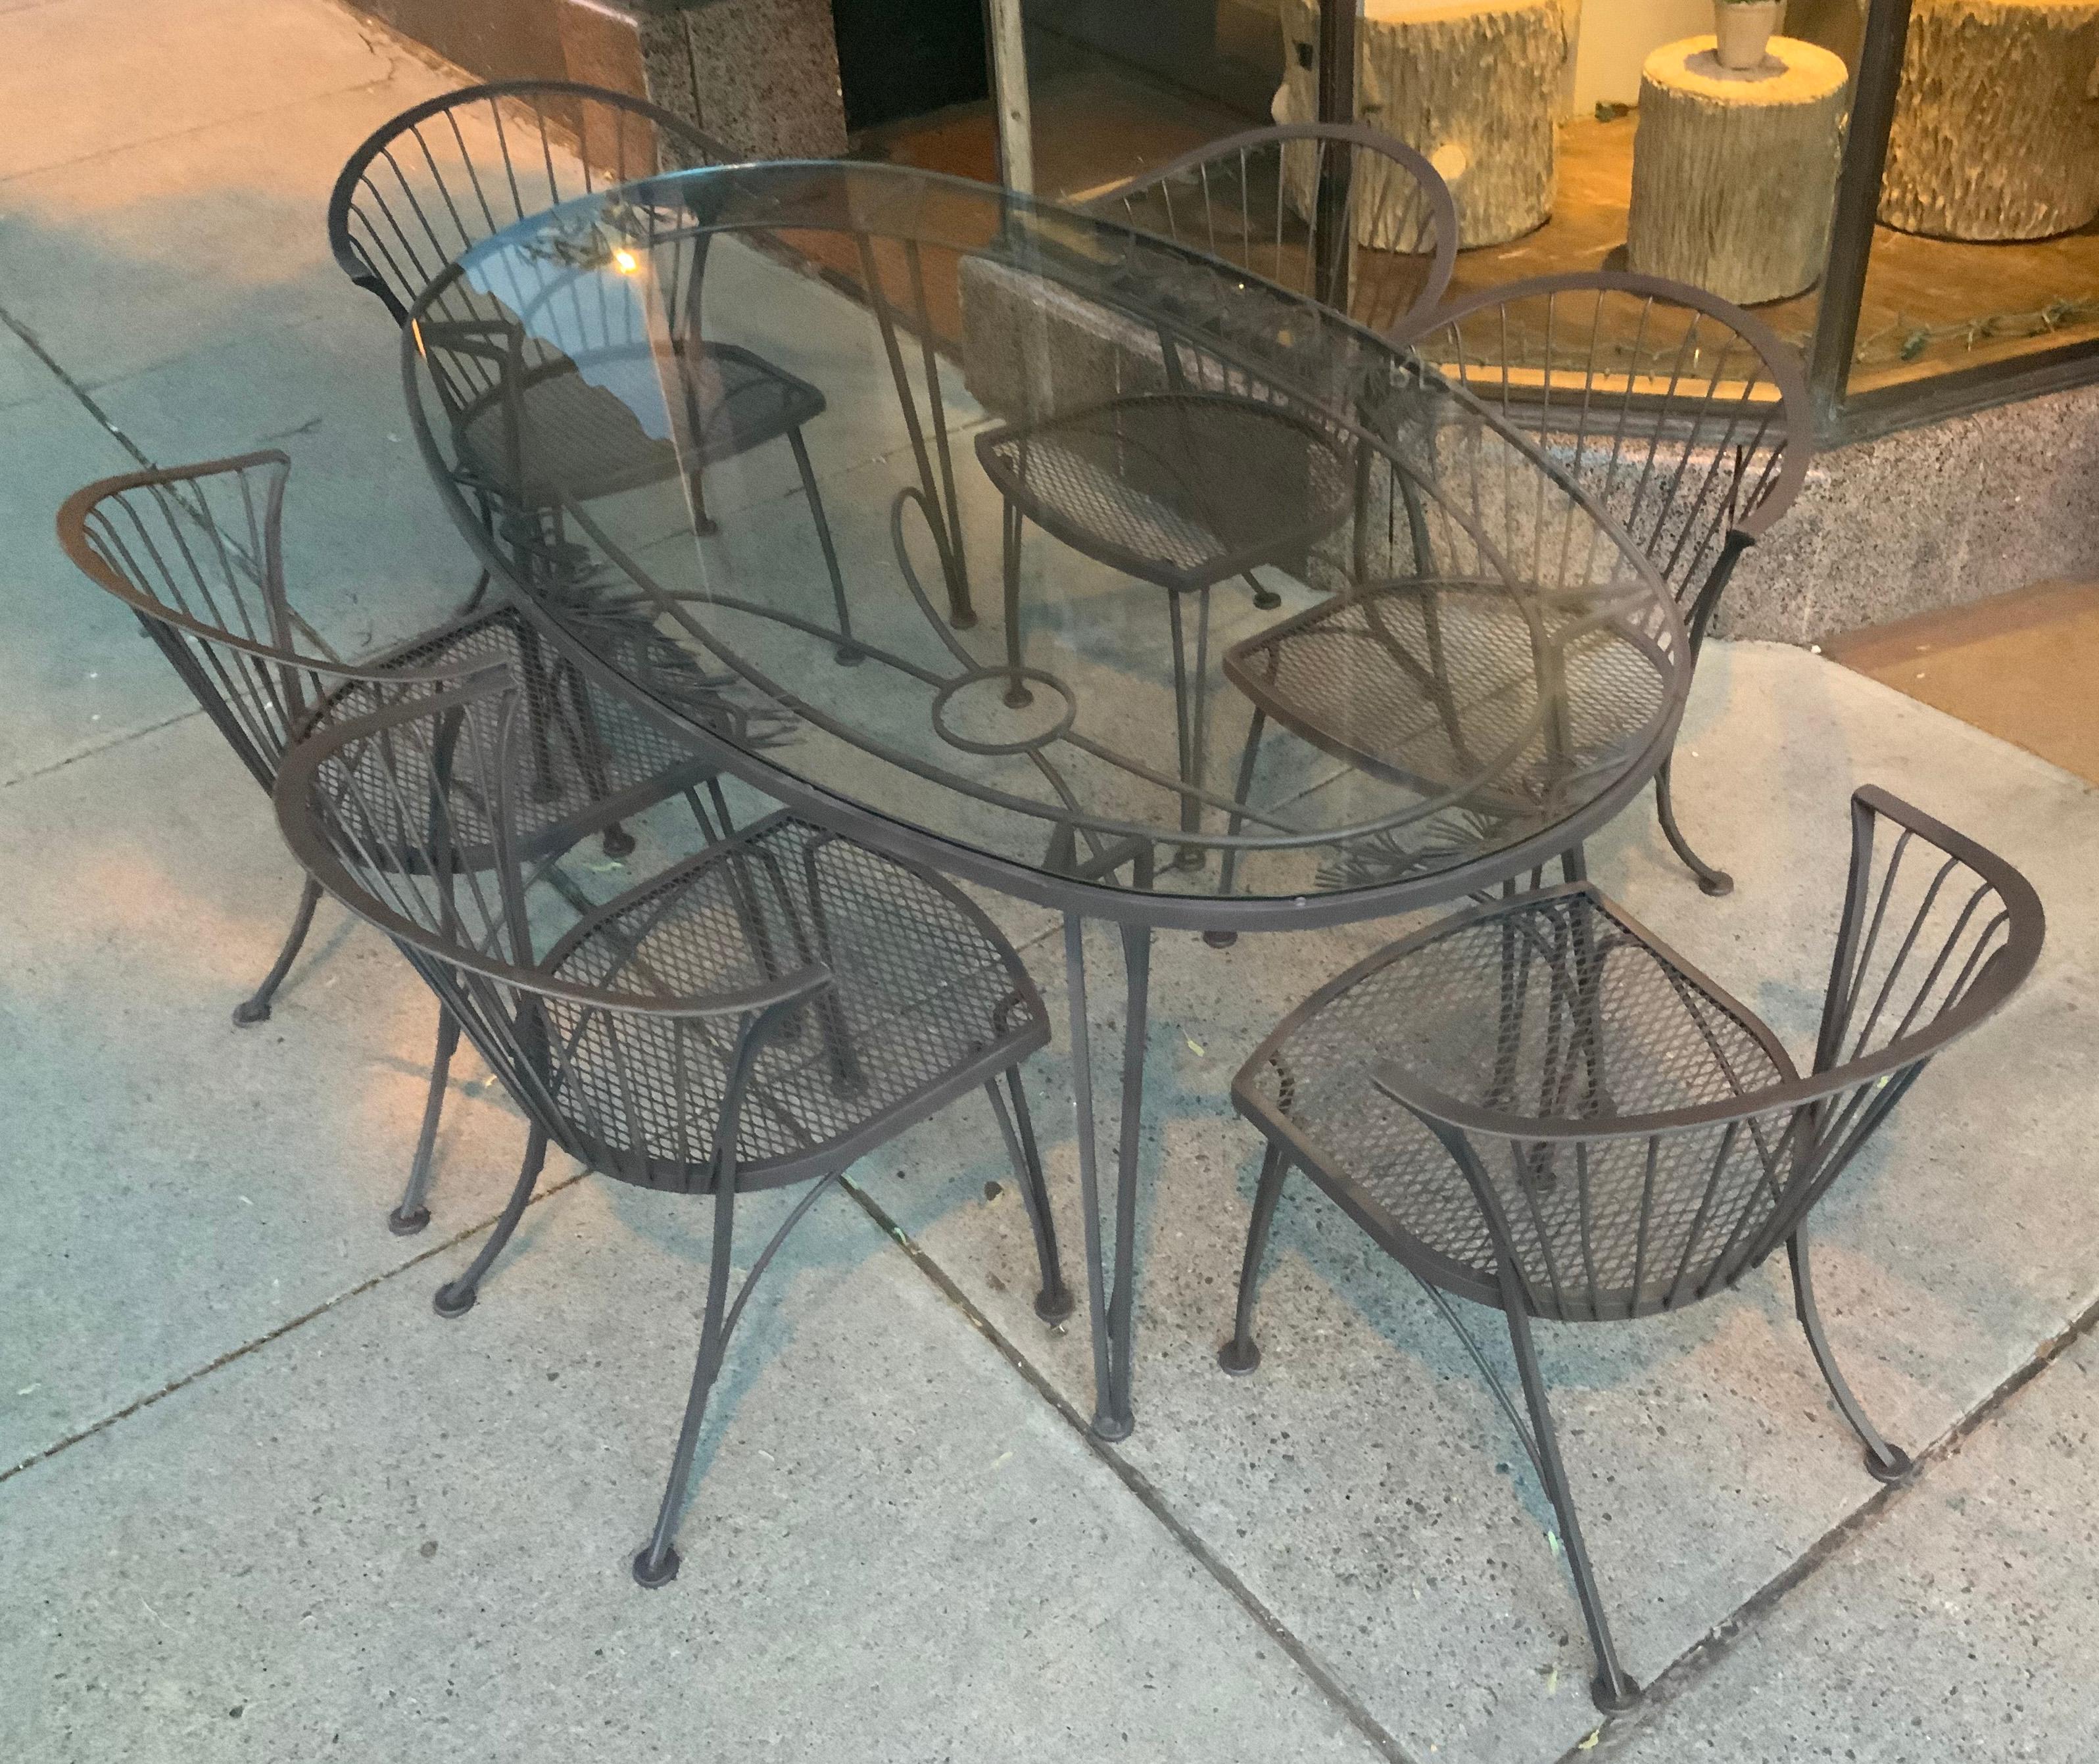 A vintage 1950s wrought iron garden dining set by Woodard. 'Pinecrest' was one of their most charming designs in the 1950s, named for the pine needle & pinecone motif in the skirt of the dining table. this set consists of the largest oval dining